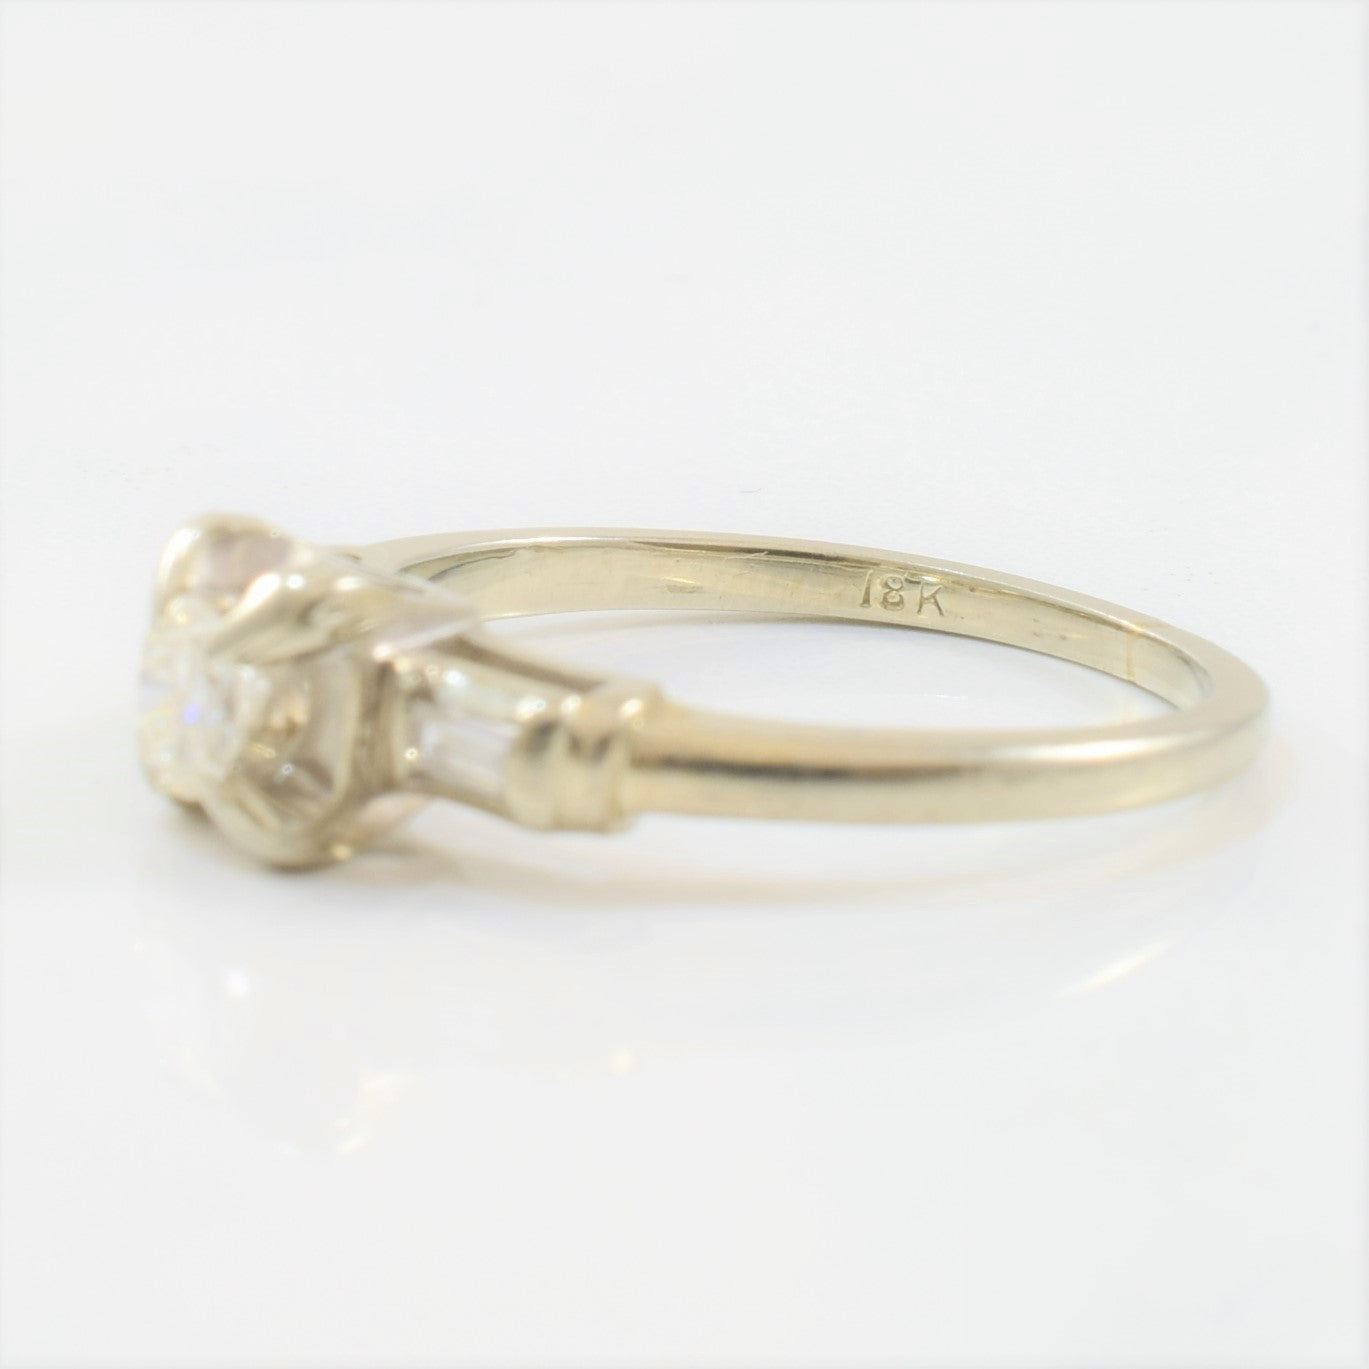 Courtship' Early 1930s Three Stone Engagement Ring | 0.25ctw | SZ 6.25 |